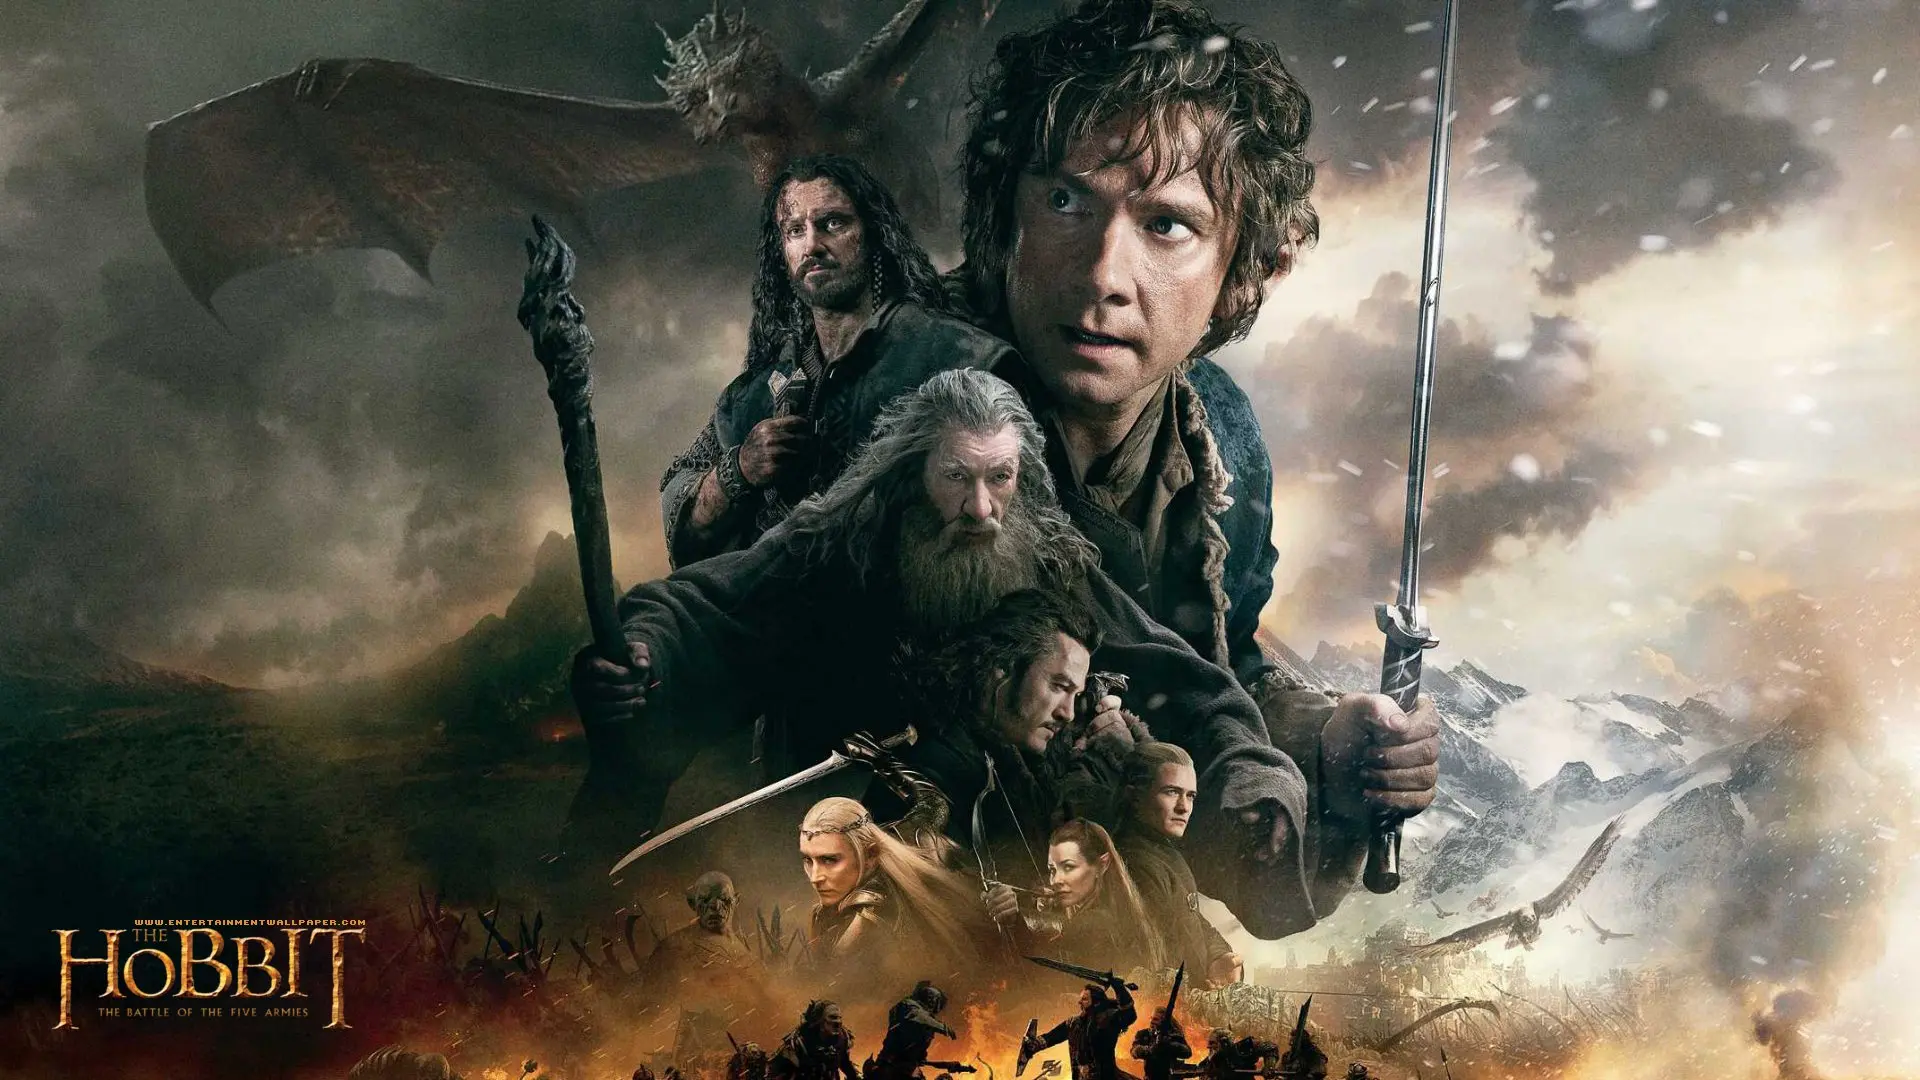 Movie The Hobbit the Battle of the Five Armies wallpaper 6 | Background Image